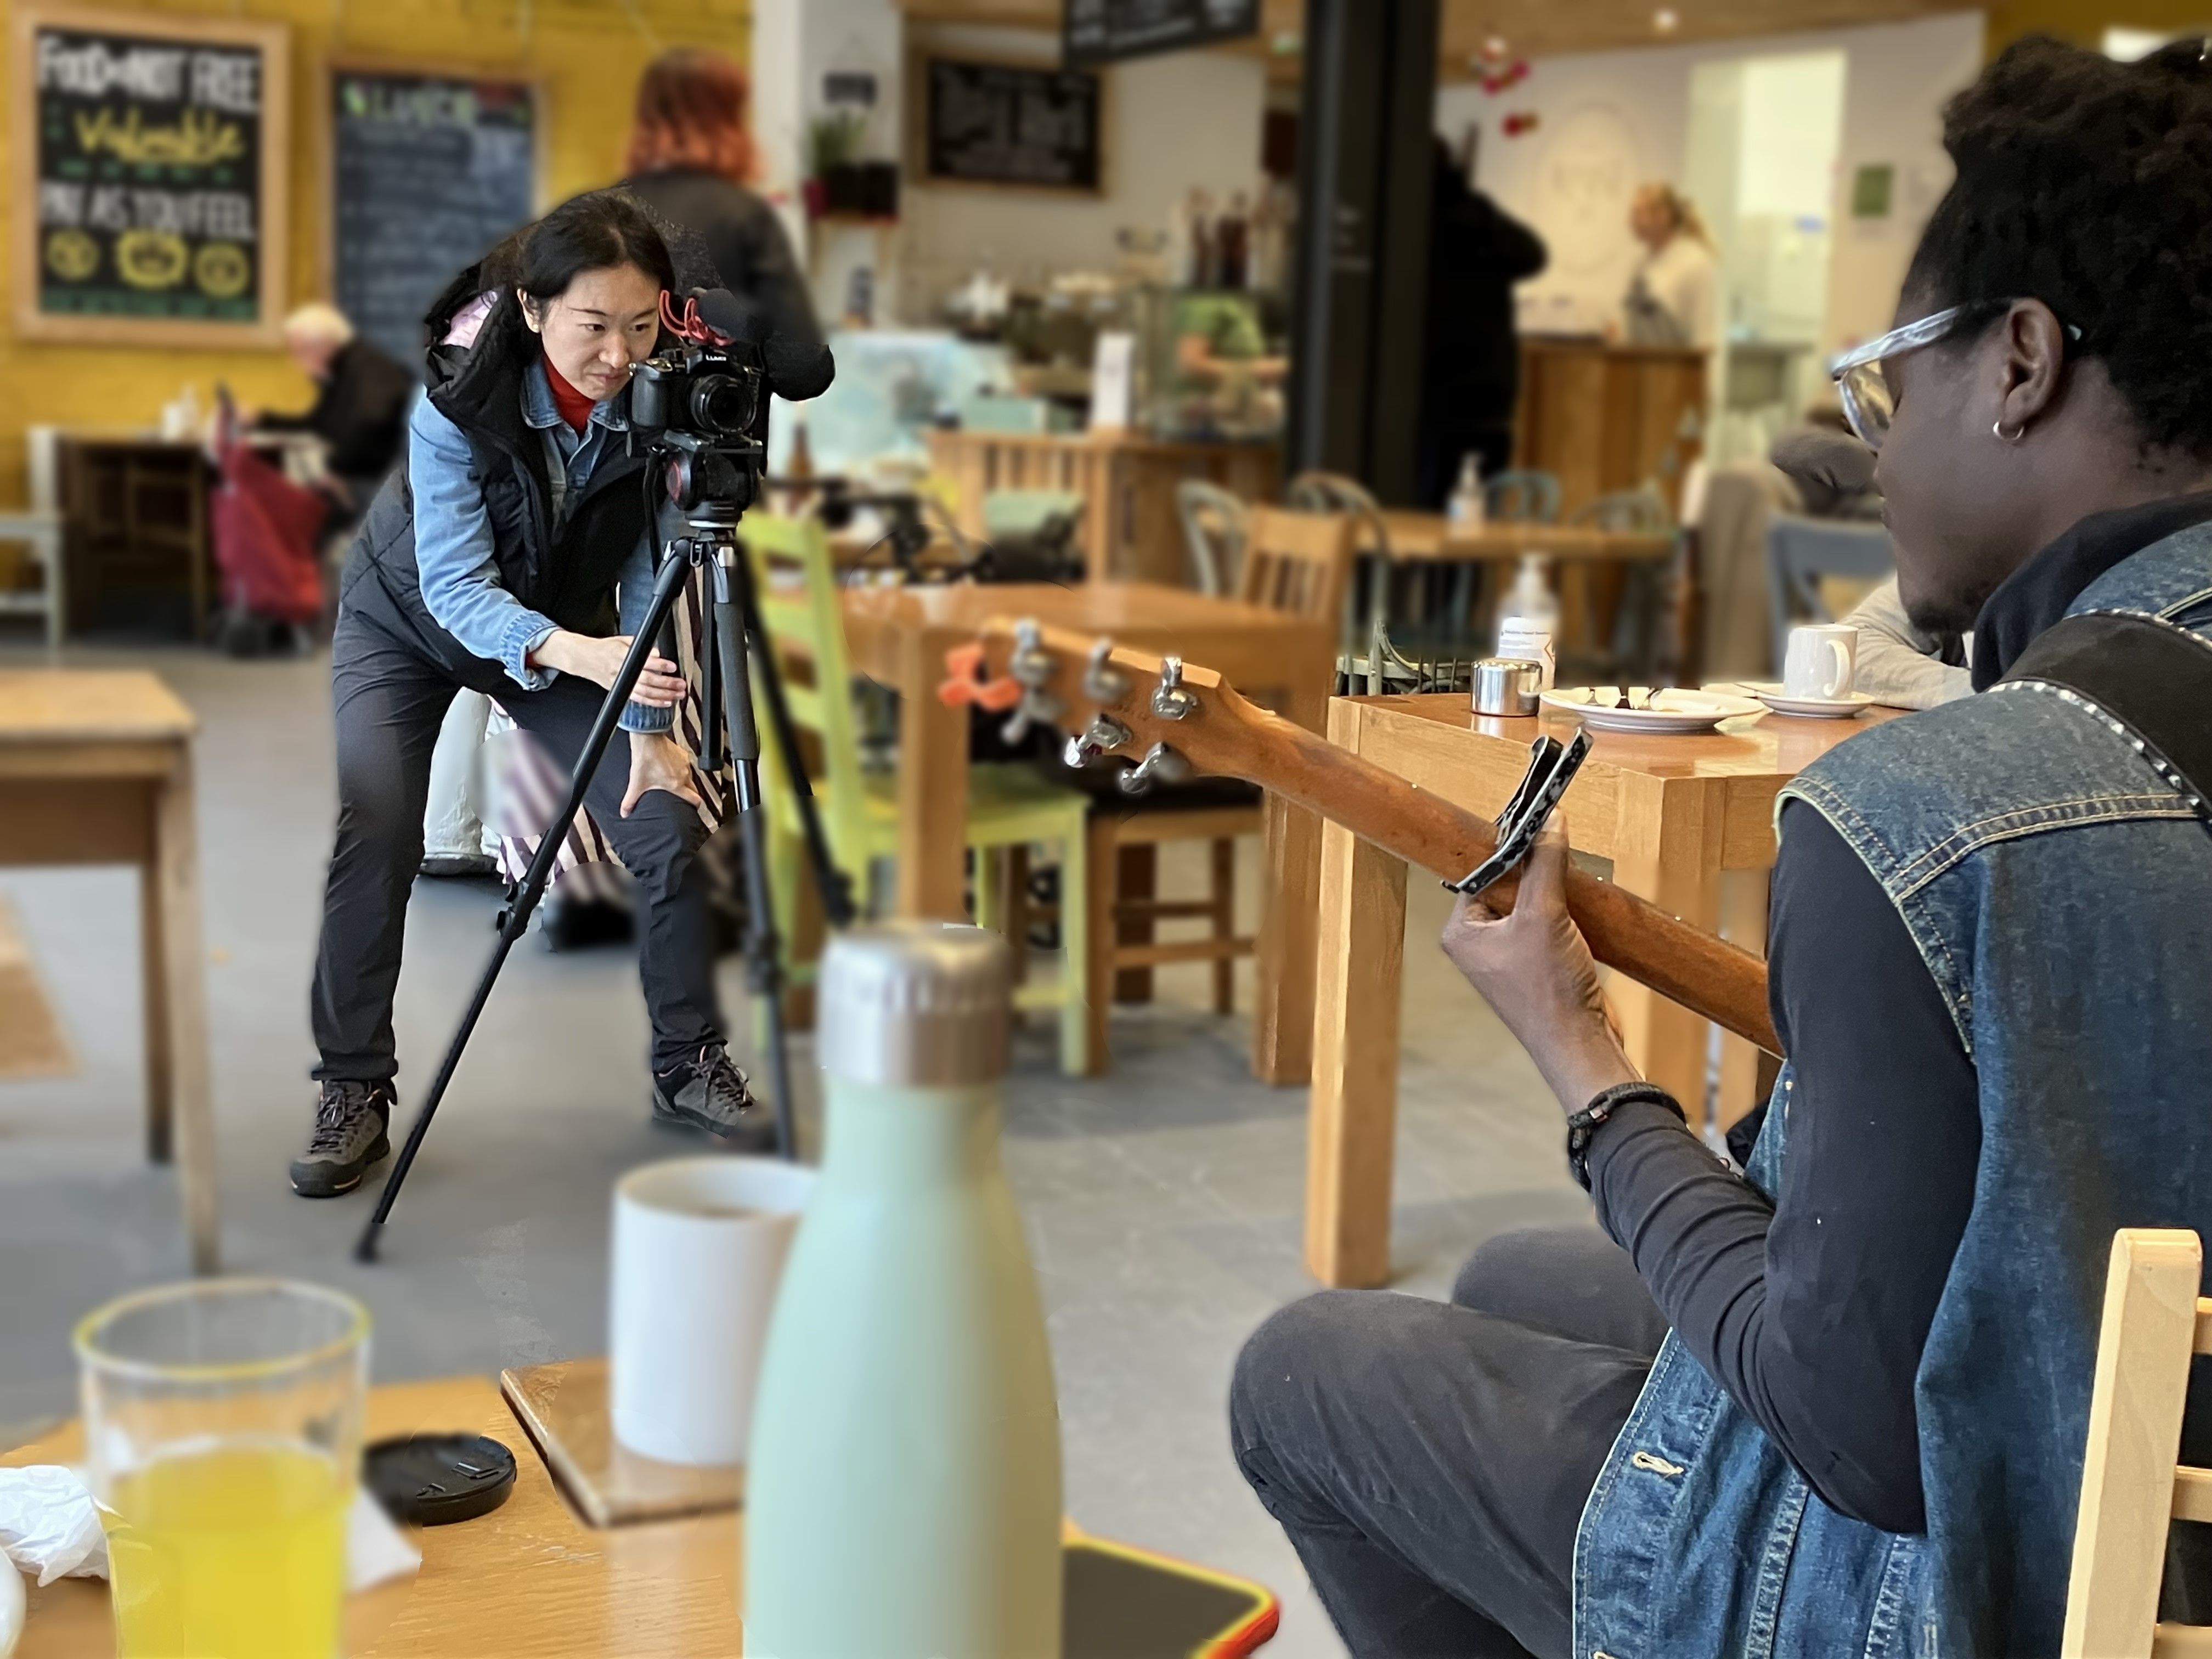 Behind the scenes: Ran Wei filming Ezé for the documentary during Drop-in at REfUSE Café in Chester-le-Street